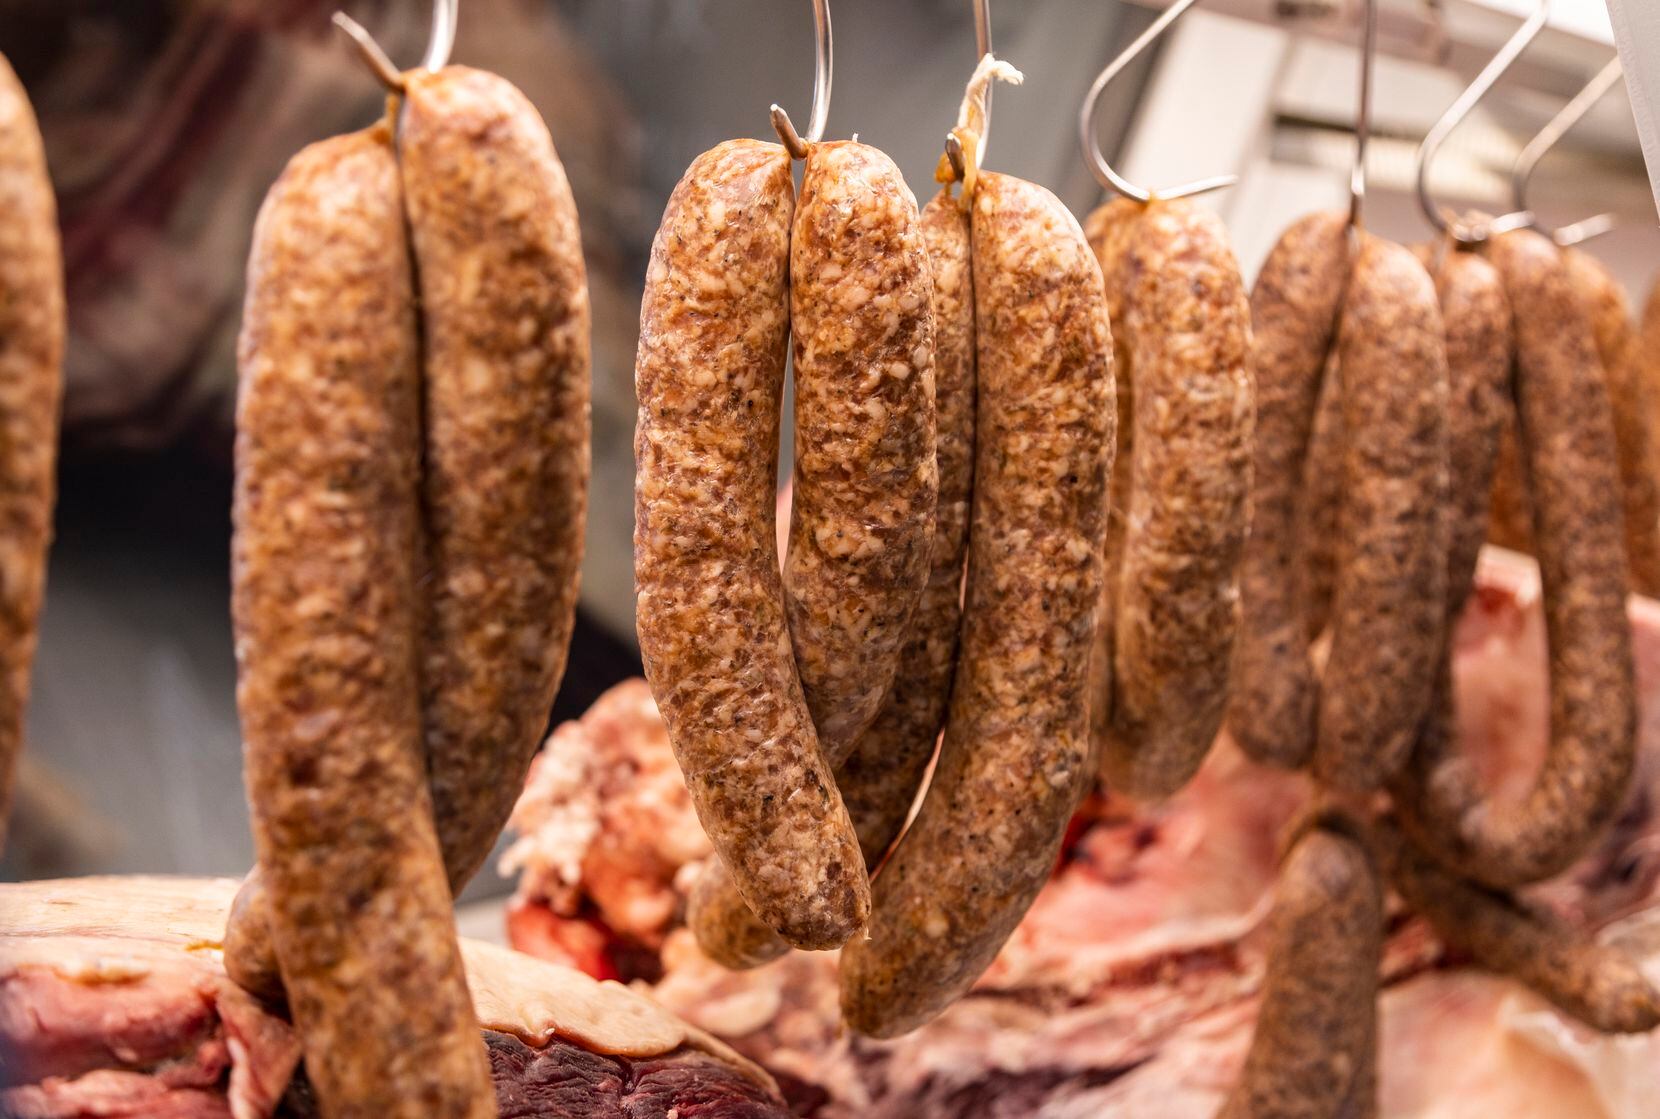 Custom Meats in University Park sells house-made sausages.